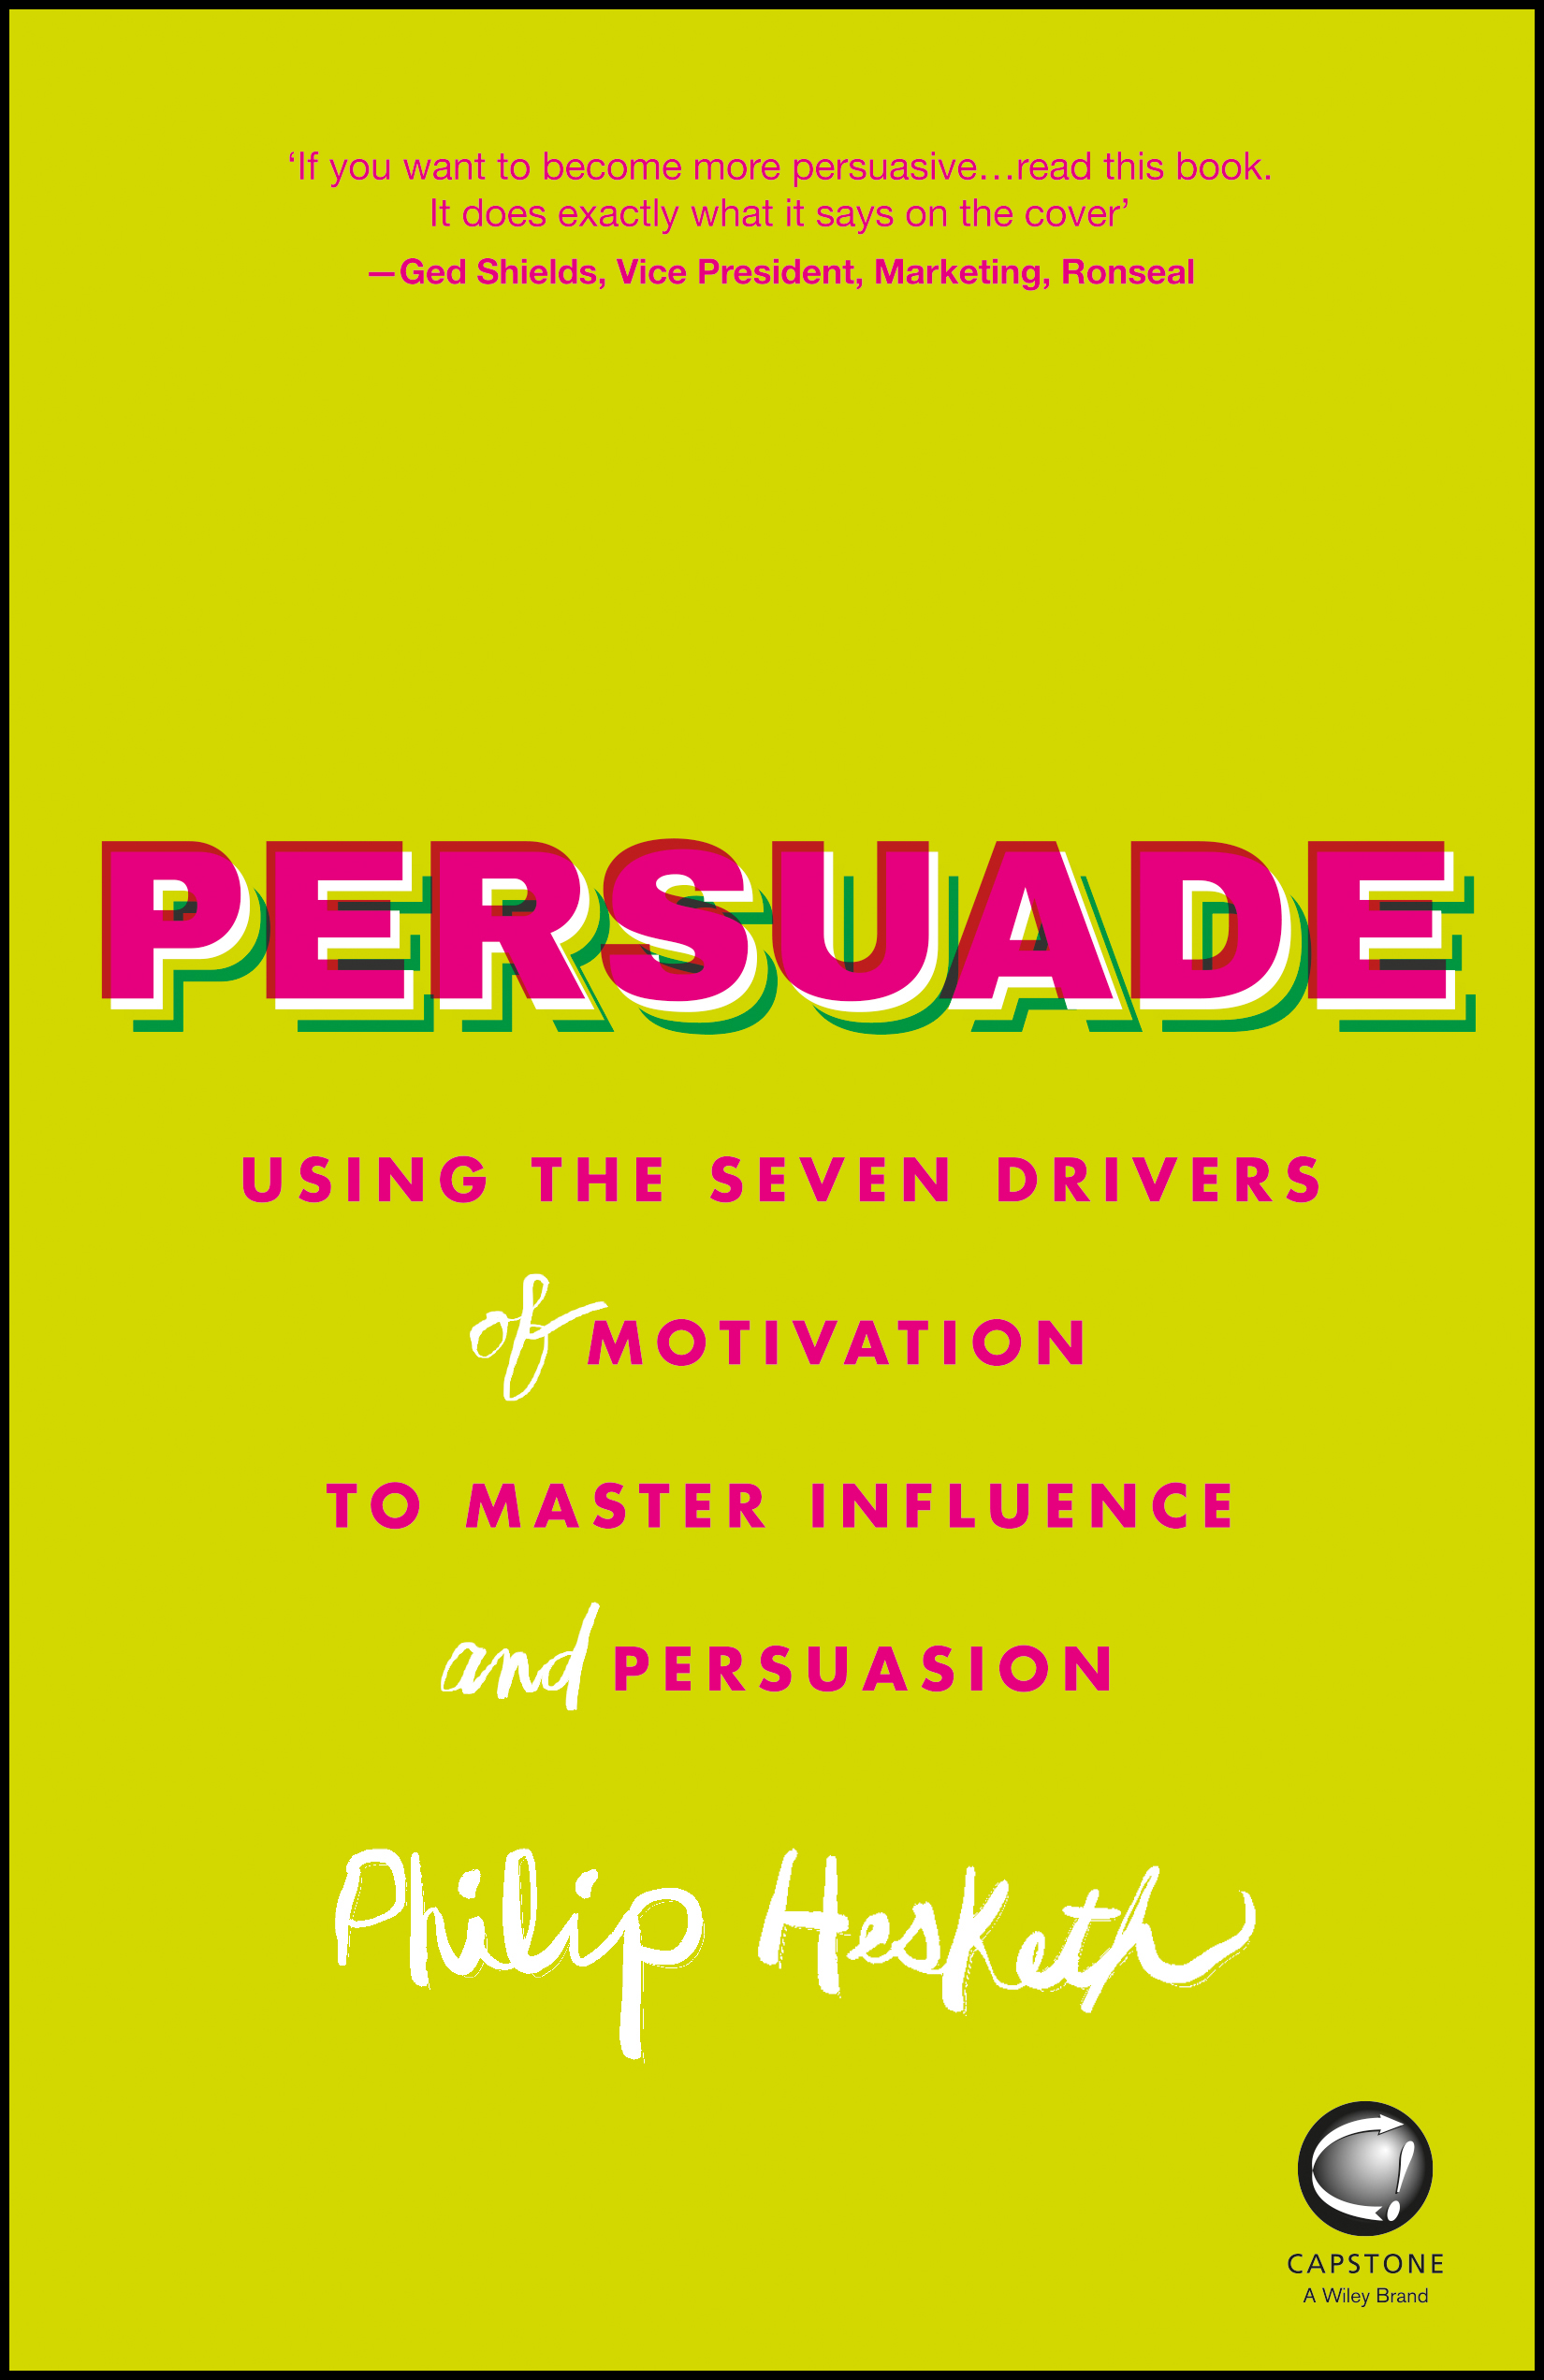 Persuade--Using-the-Seven-Drivers-of-Motivation-to-Master-Influence-and-Persuasion